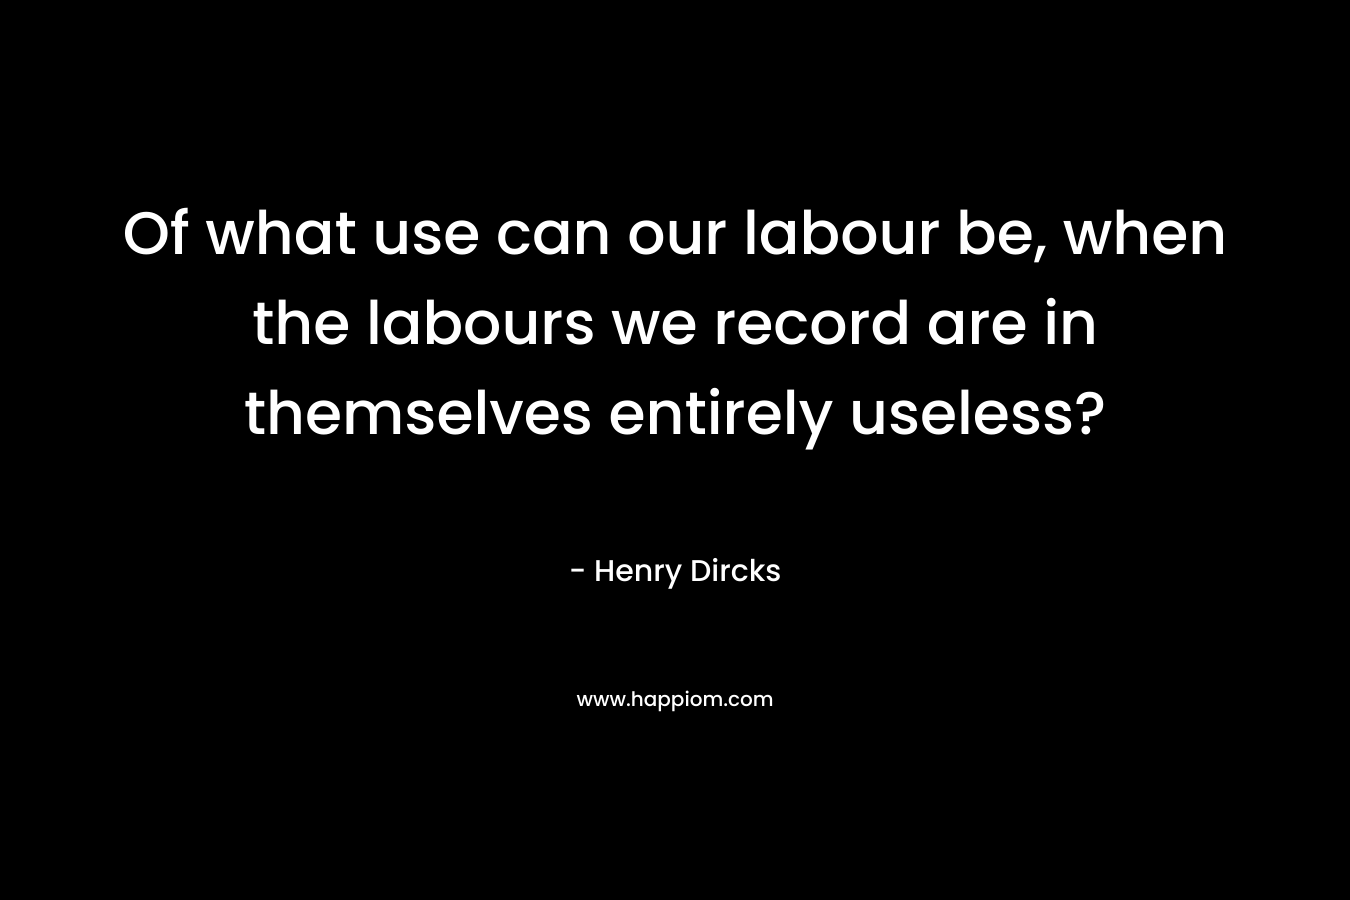 Of what use can our labour be, when the labours we record are in themselves entirely useless? – Henry Dircks